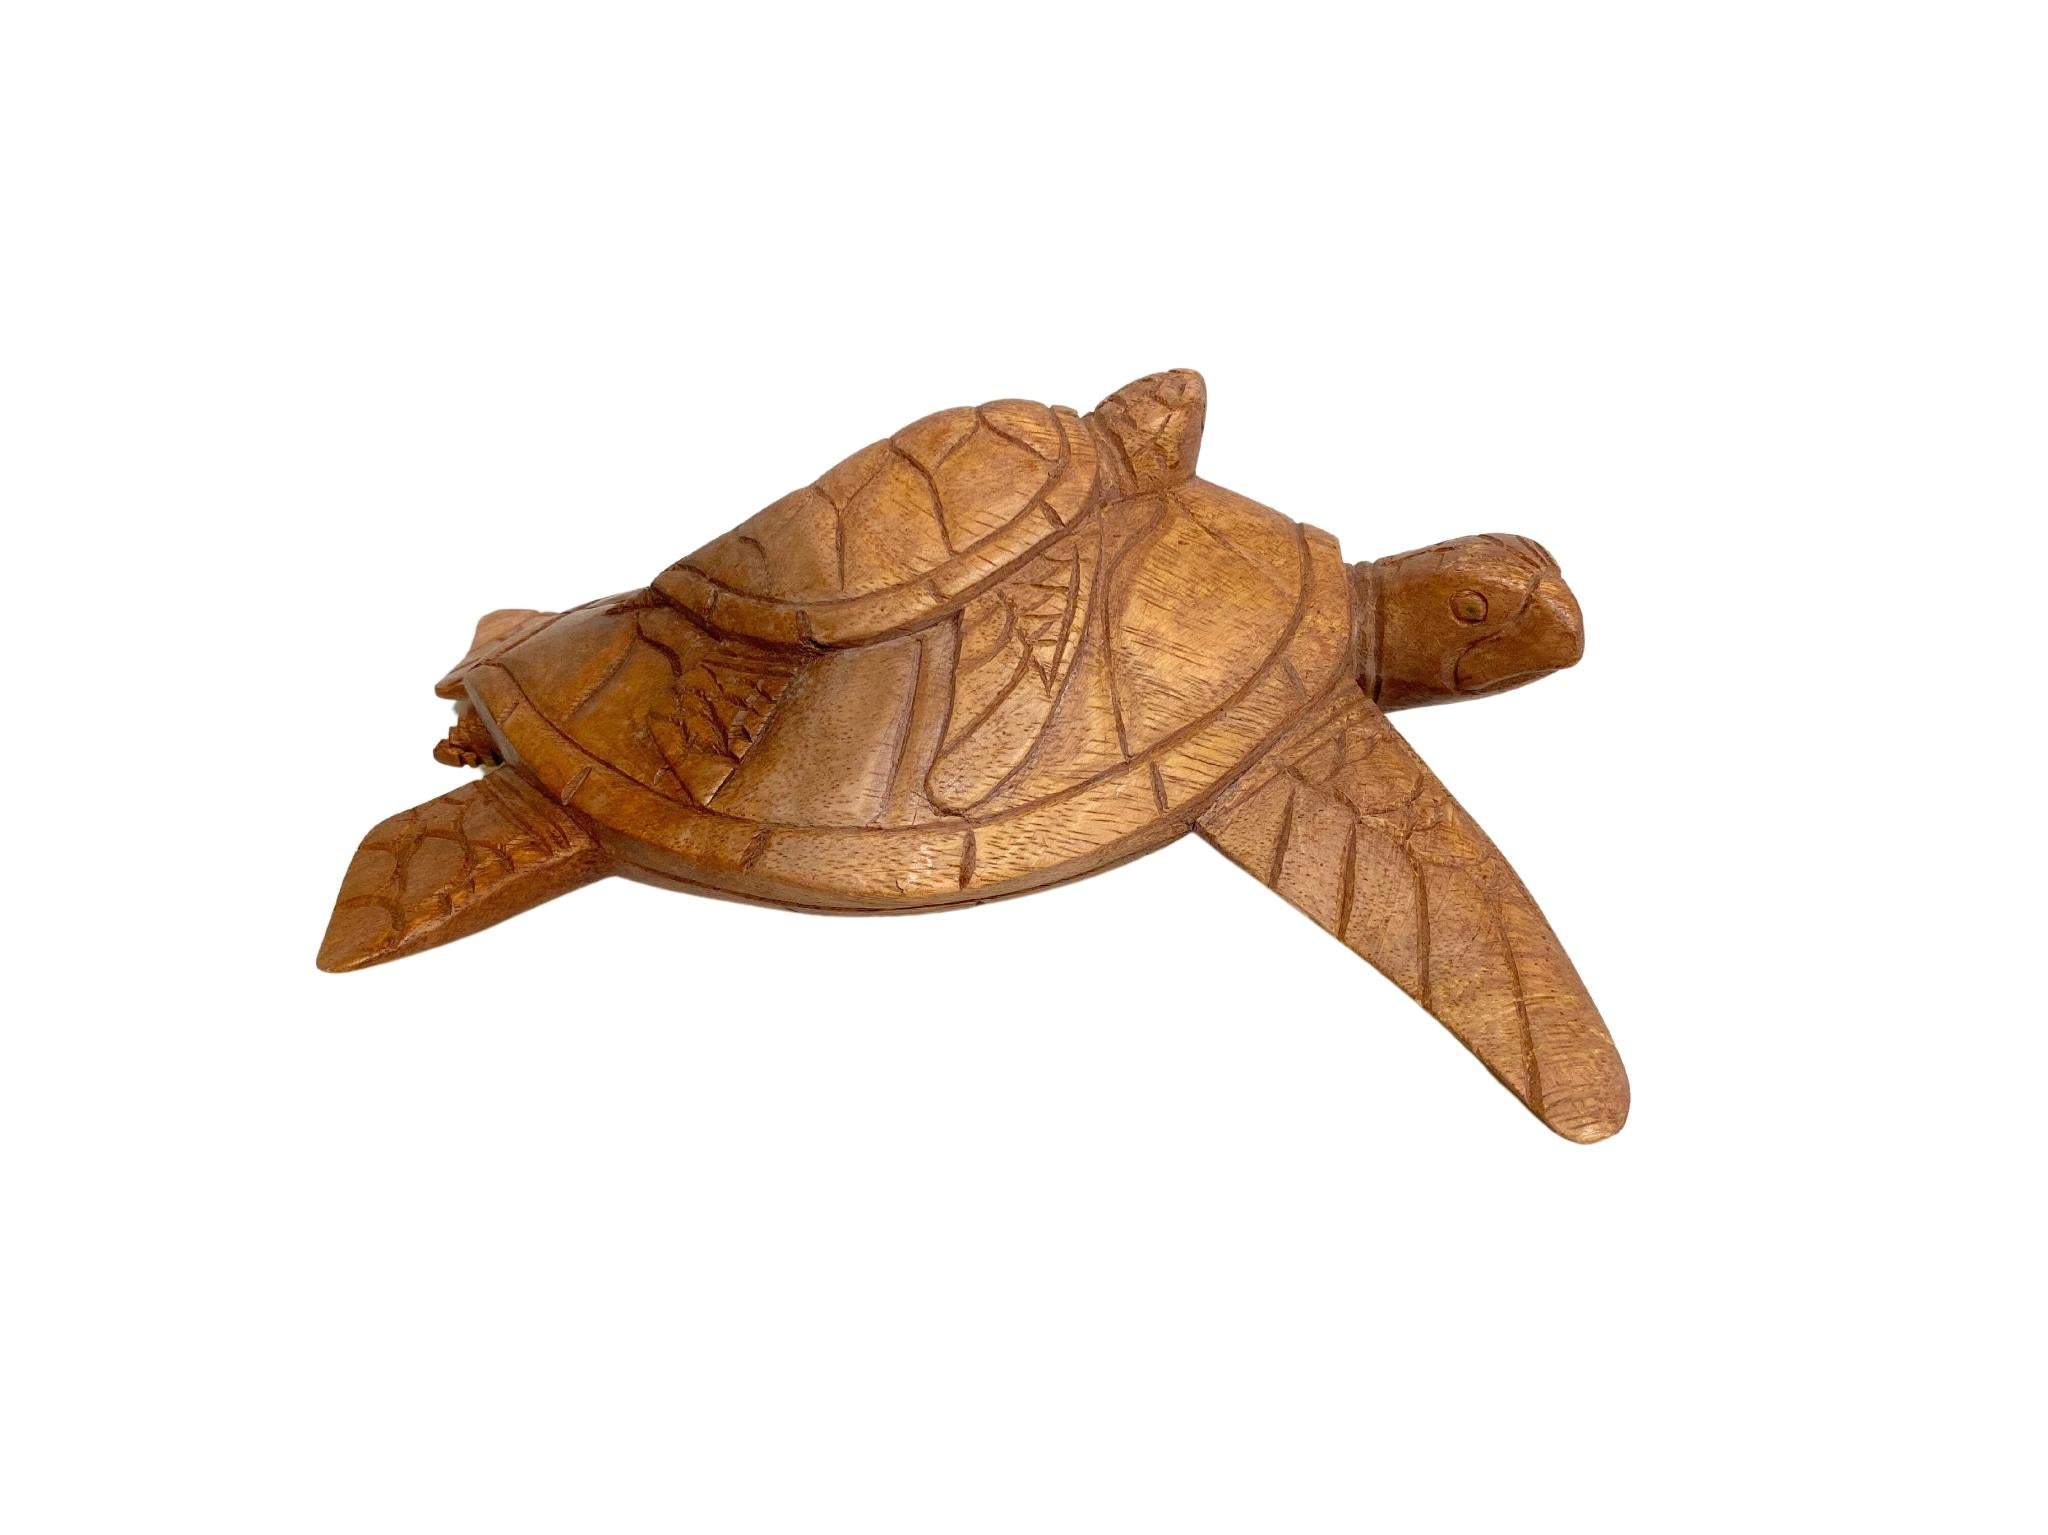 Wood Sea Turtle Sculpture from Bali, Turtle Mother with Baby on Back Sculpture Solid Wood Wooden Tortoise Home Decor Sculpture Statue Hand Carved Figurine - Tobmarc Home Decor & Gifts 